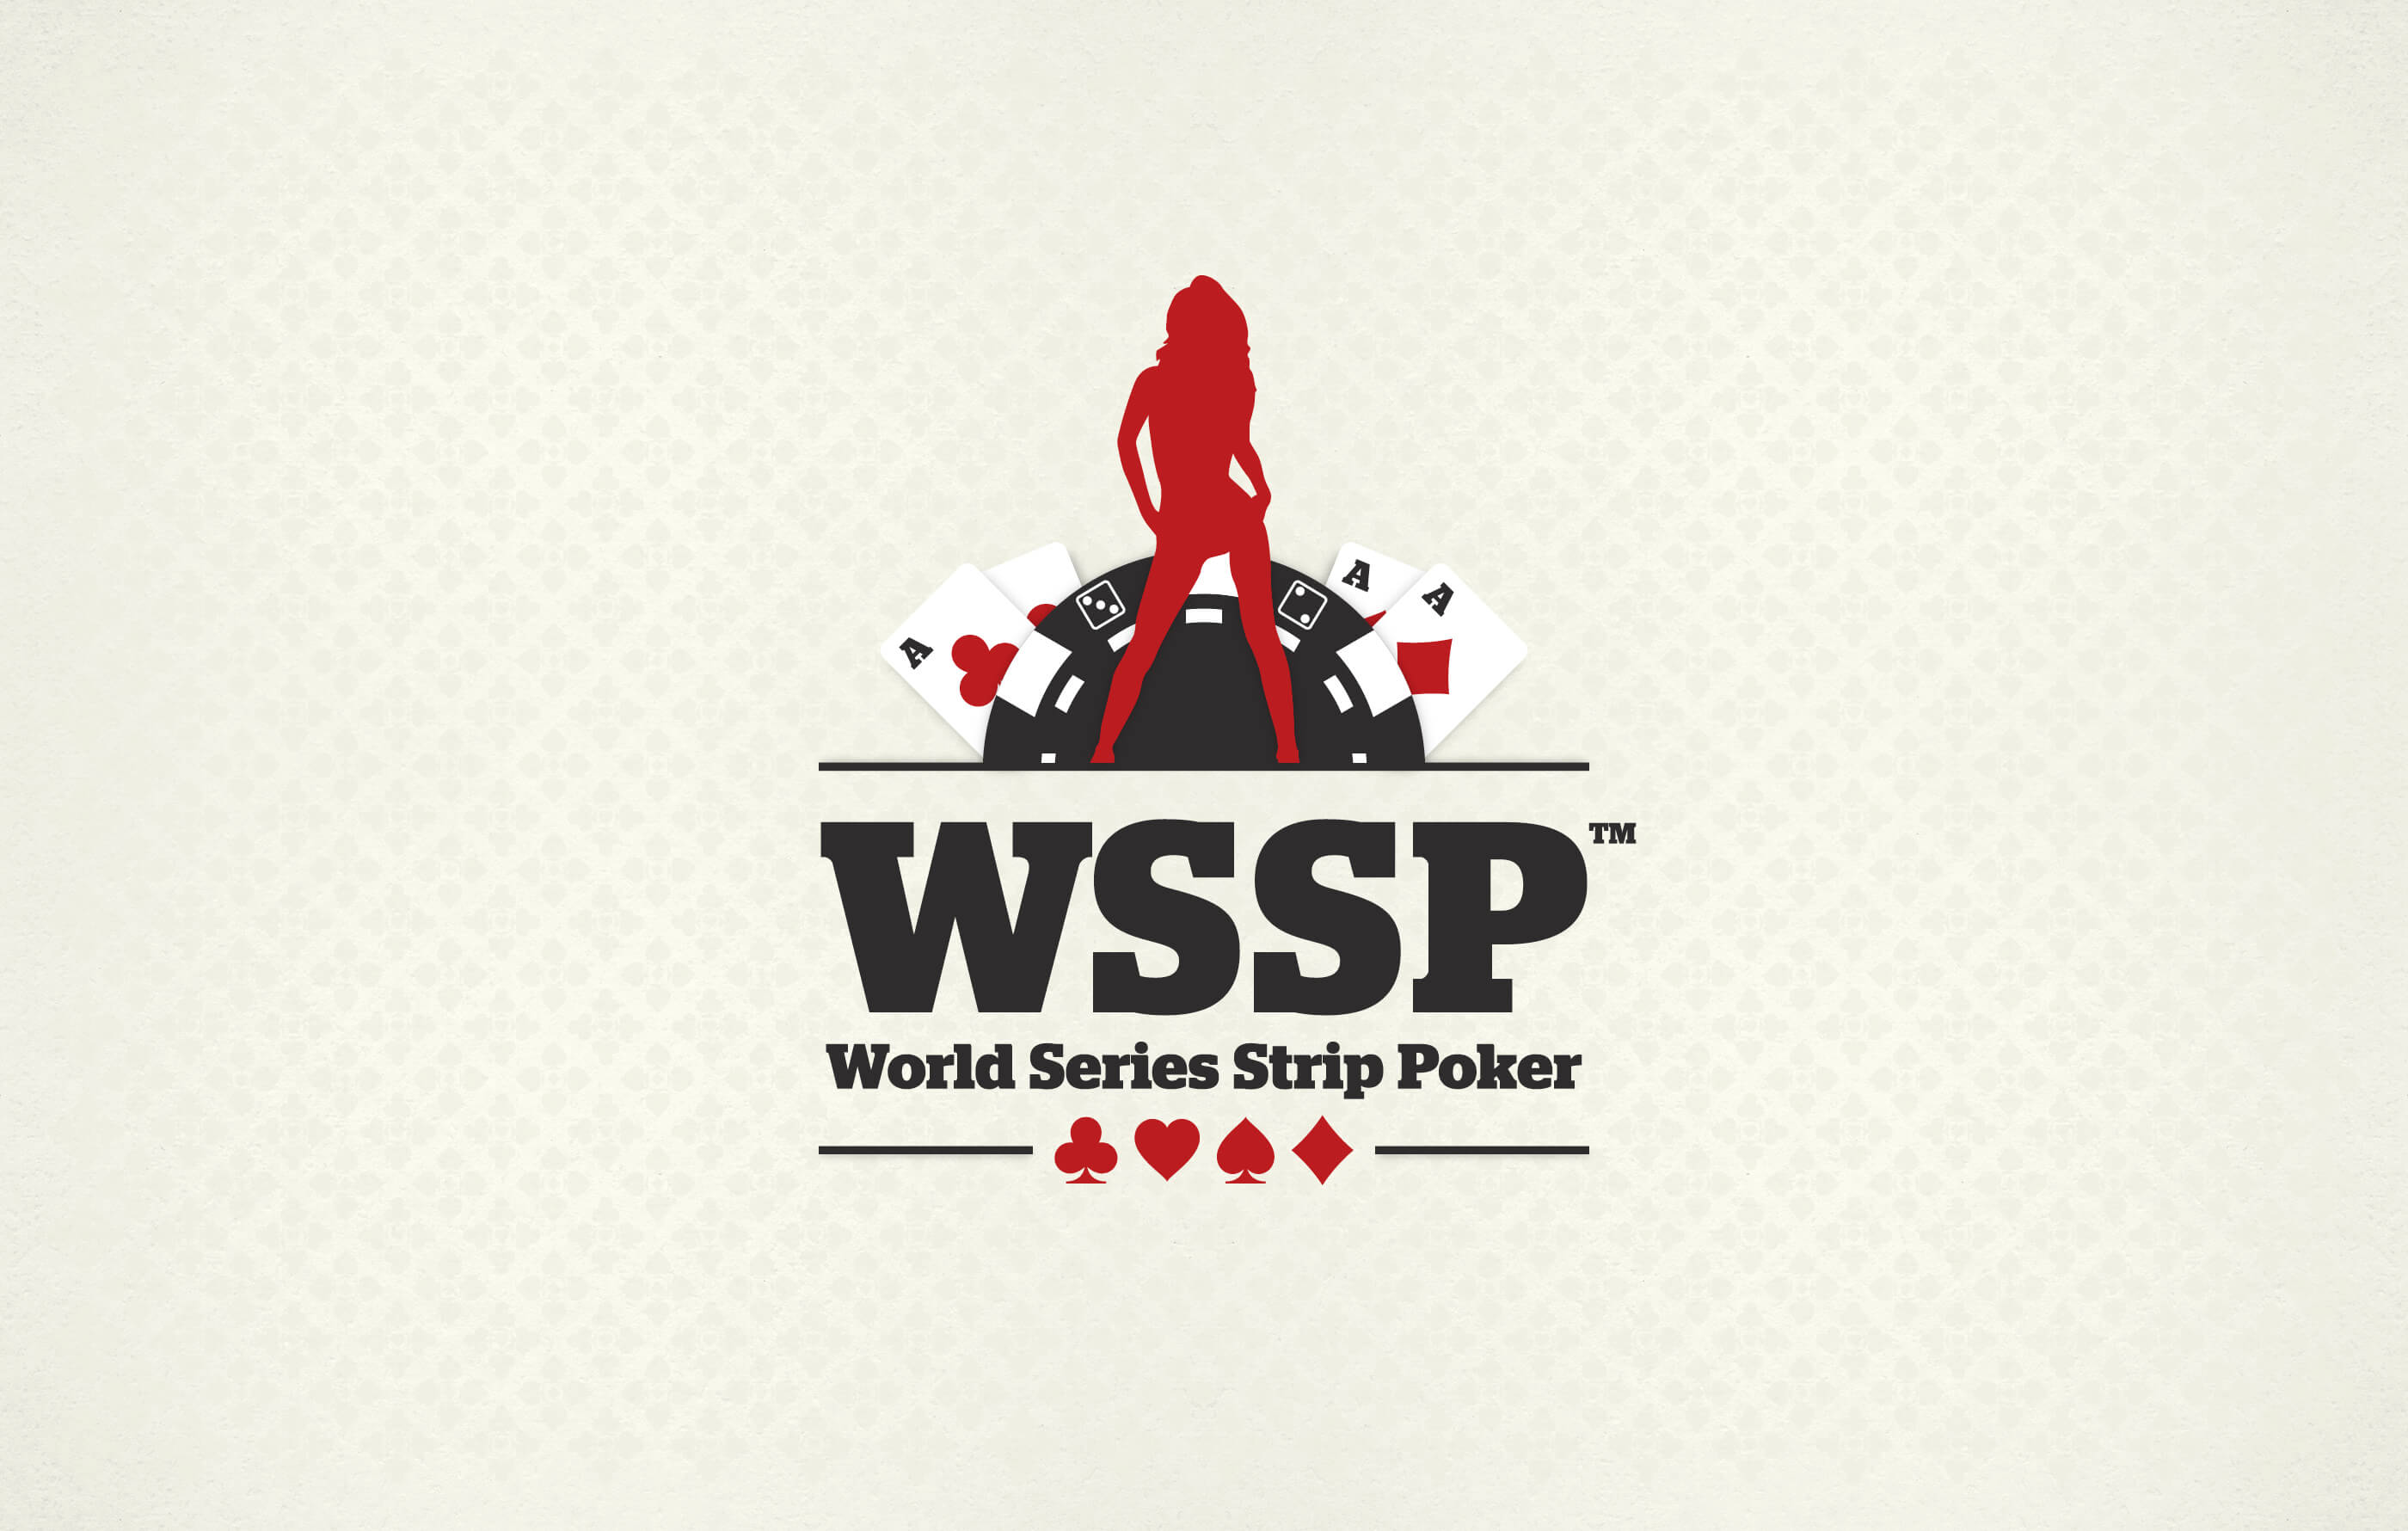 The main logo, made up of WSSP in black capital letters above the tagline World Series Strip Poker. The 4 card suit icons – hearts, spades, diamonds and clubs sit below the wording, and a woman in red stands above it